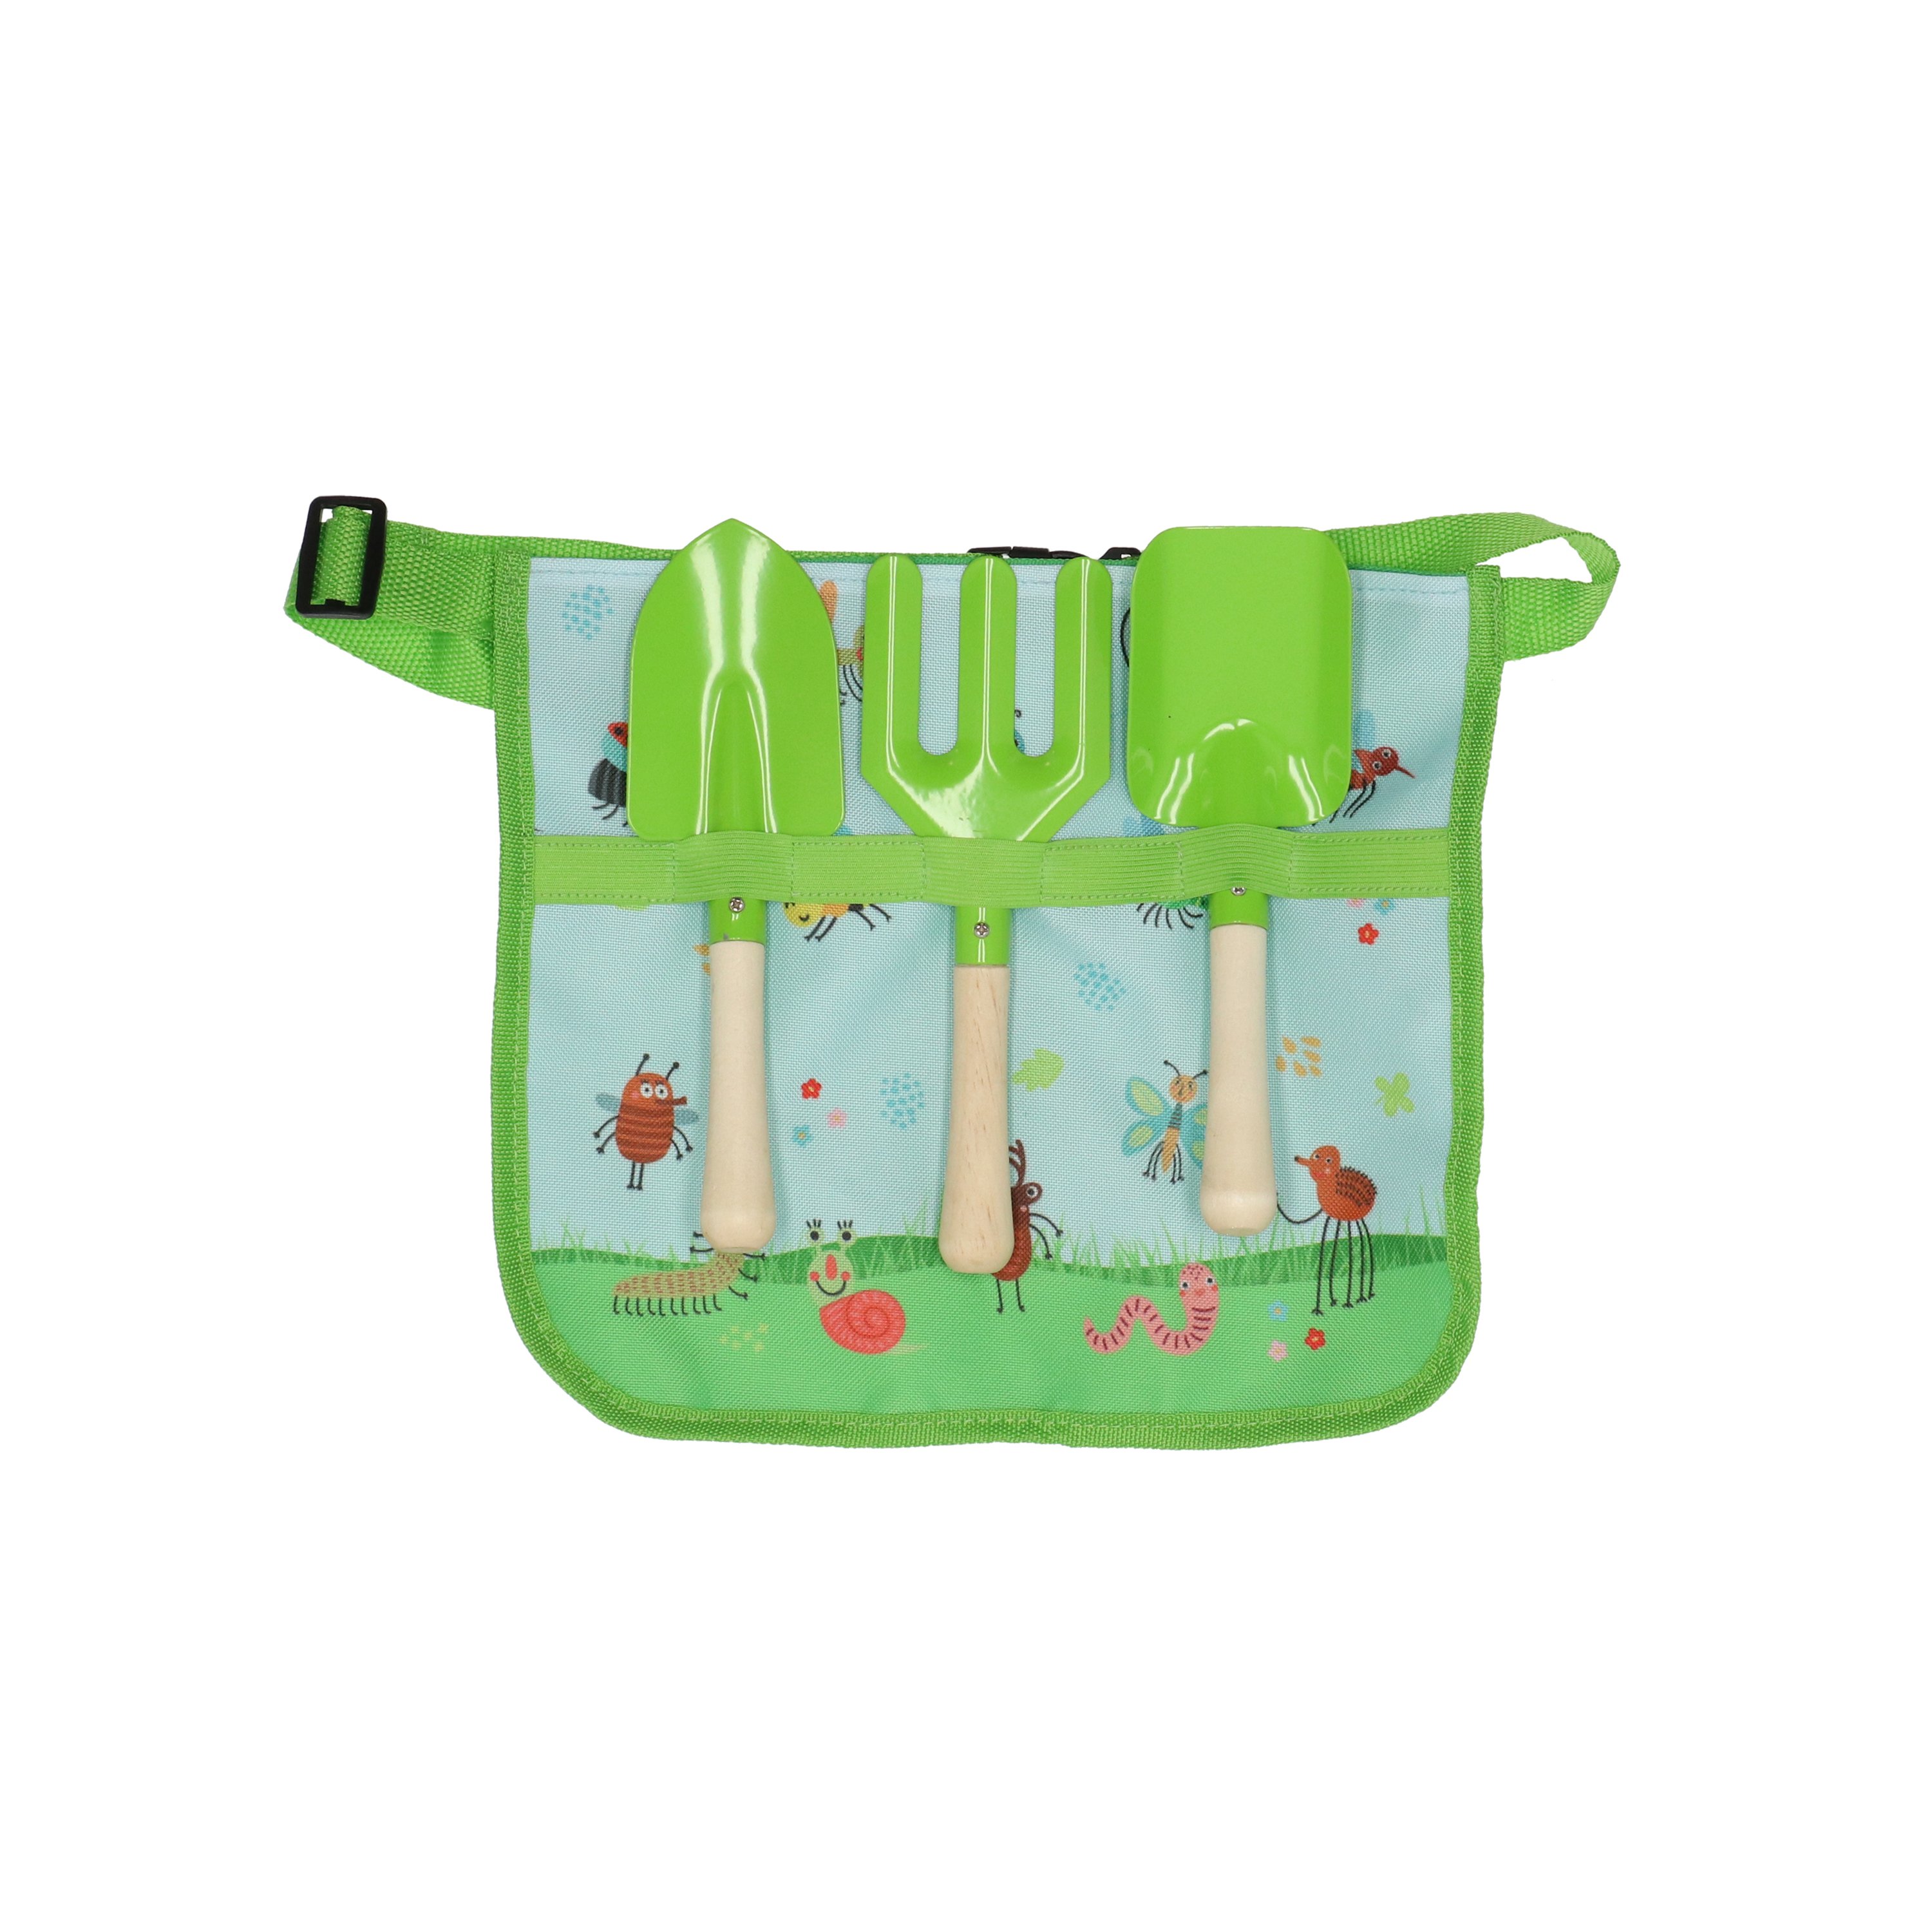 Gardenlife - Childrens toolbelt with tools insects (KG267) - Leker